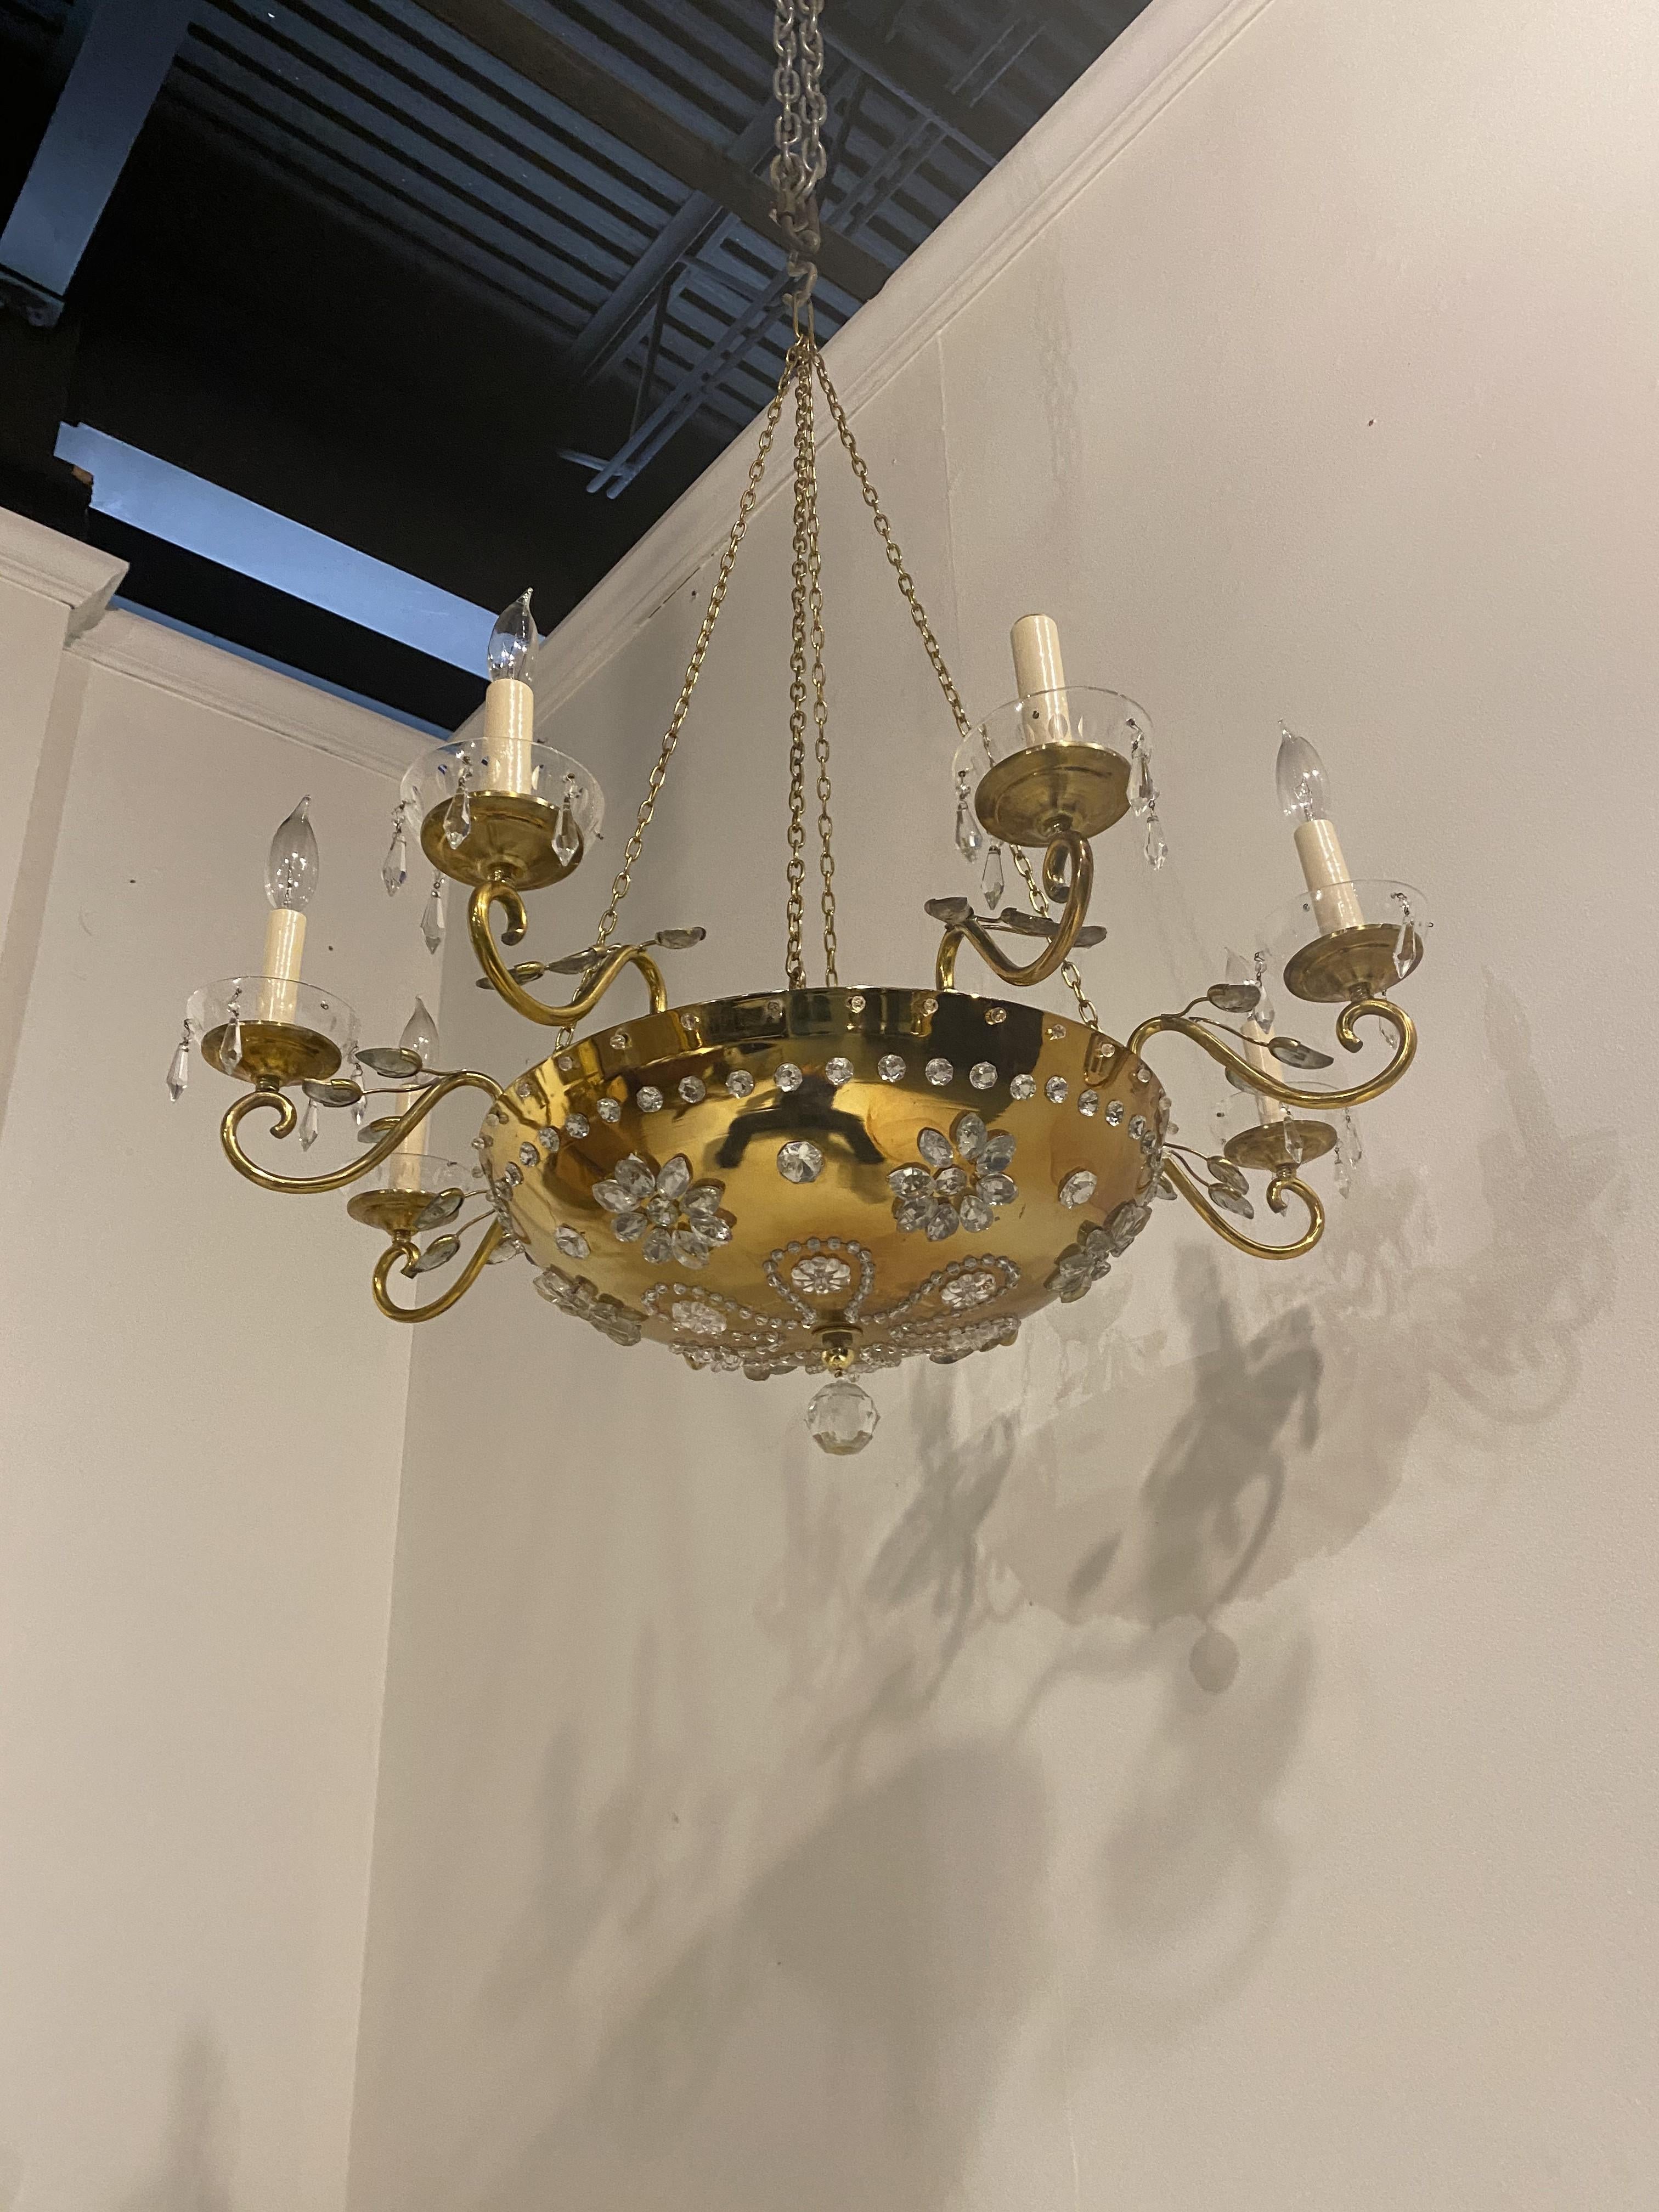 French Provincial 1930's French Bagues Bronze Light Fixture with Crystals For Sale